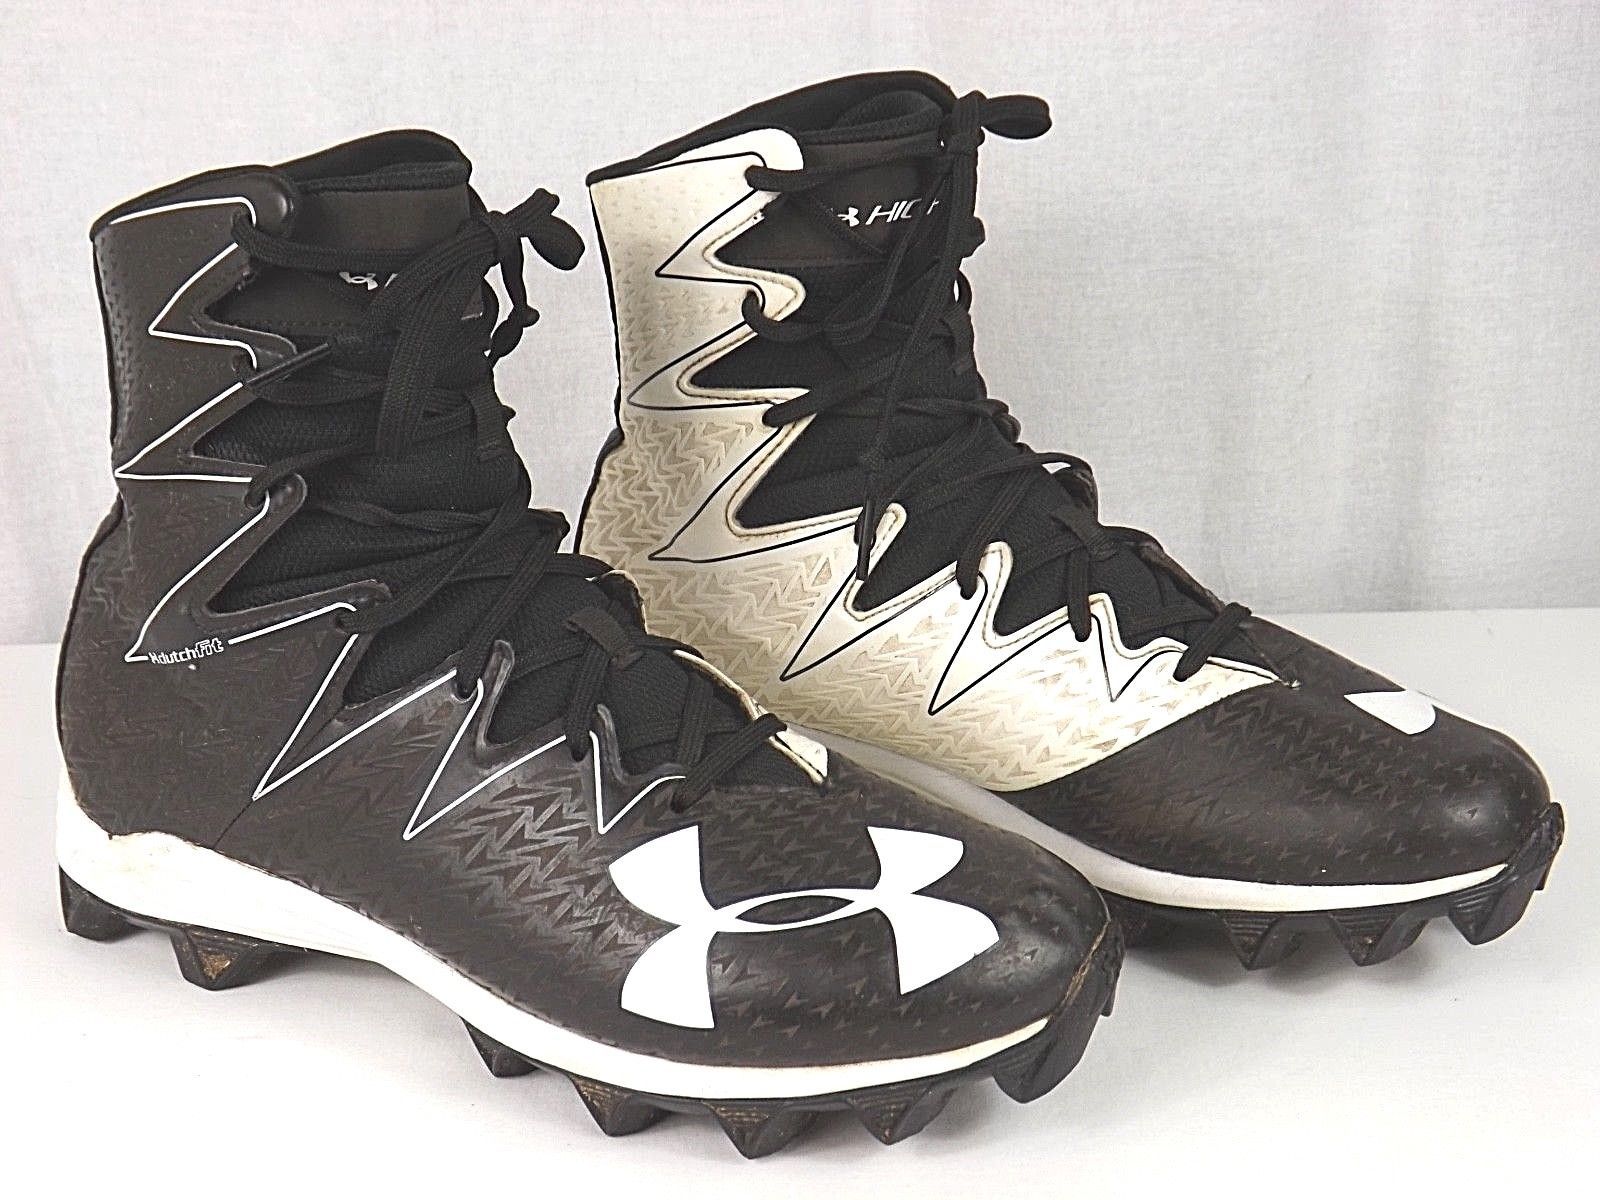 Primary image for Under Armour UA HIGHLIGHT Clutchfit Football Cleats 1269695-001 Mens Sz 9